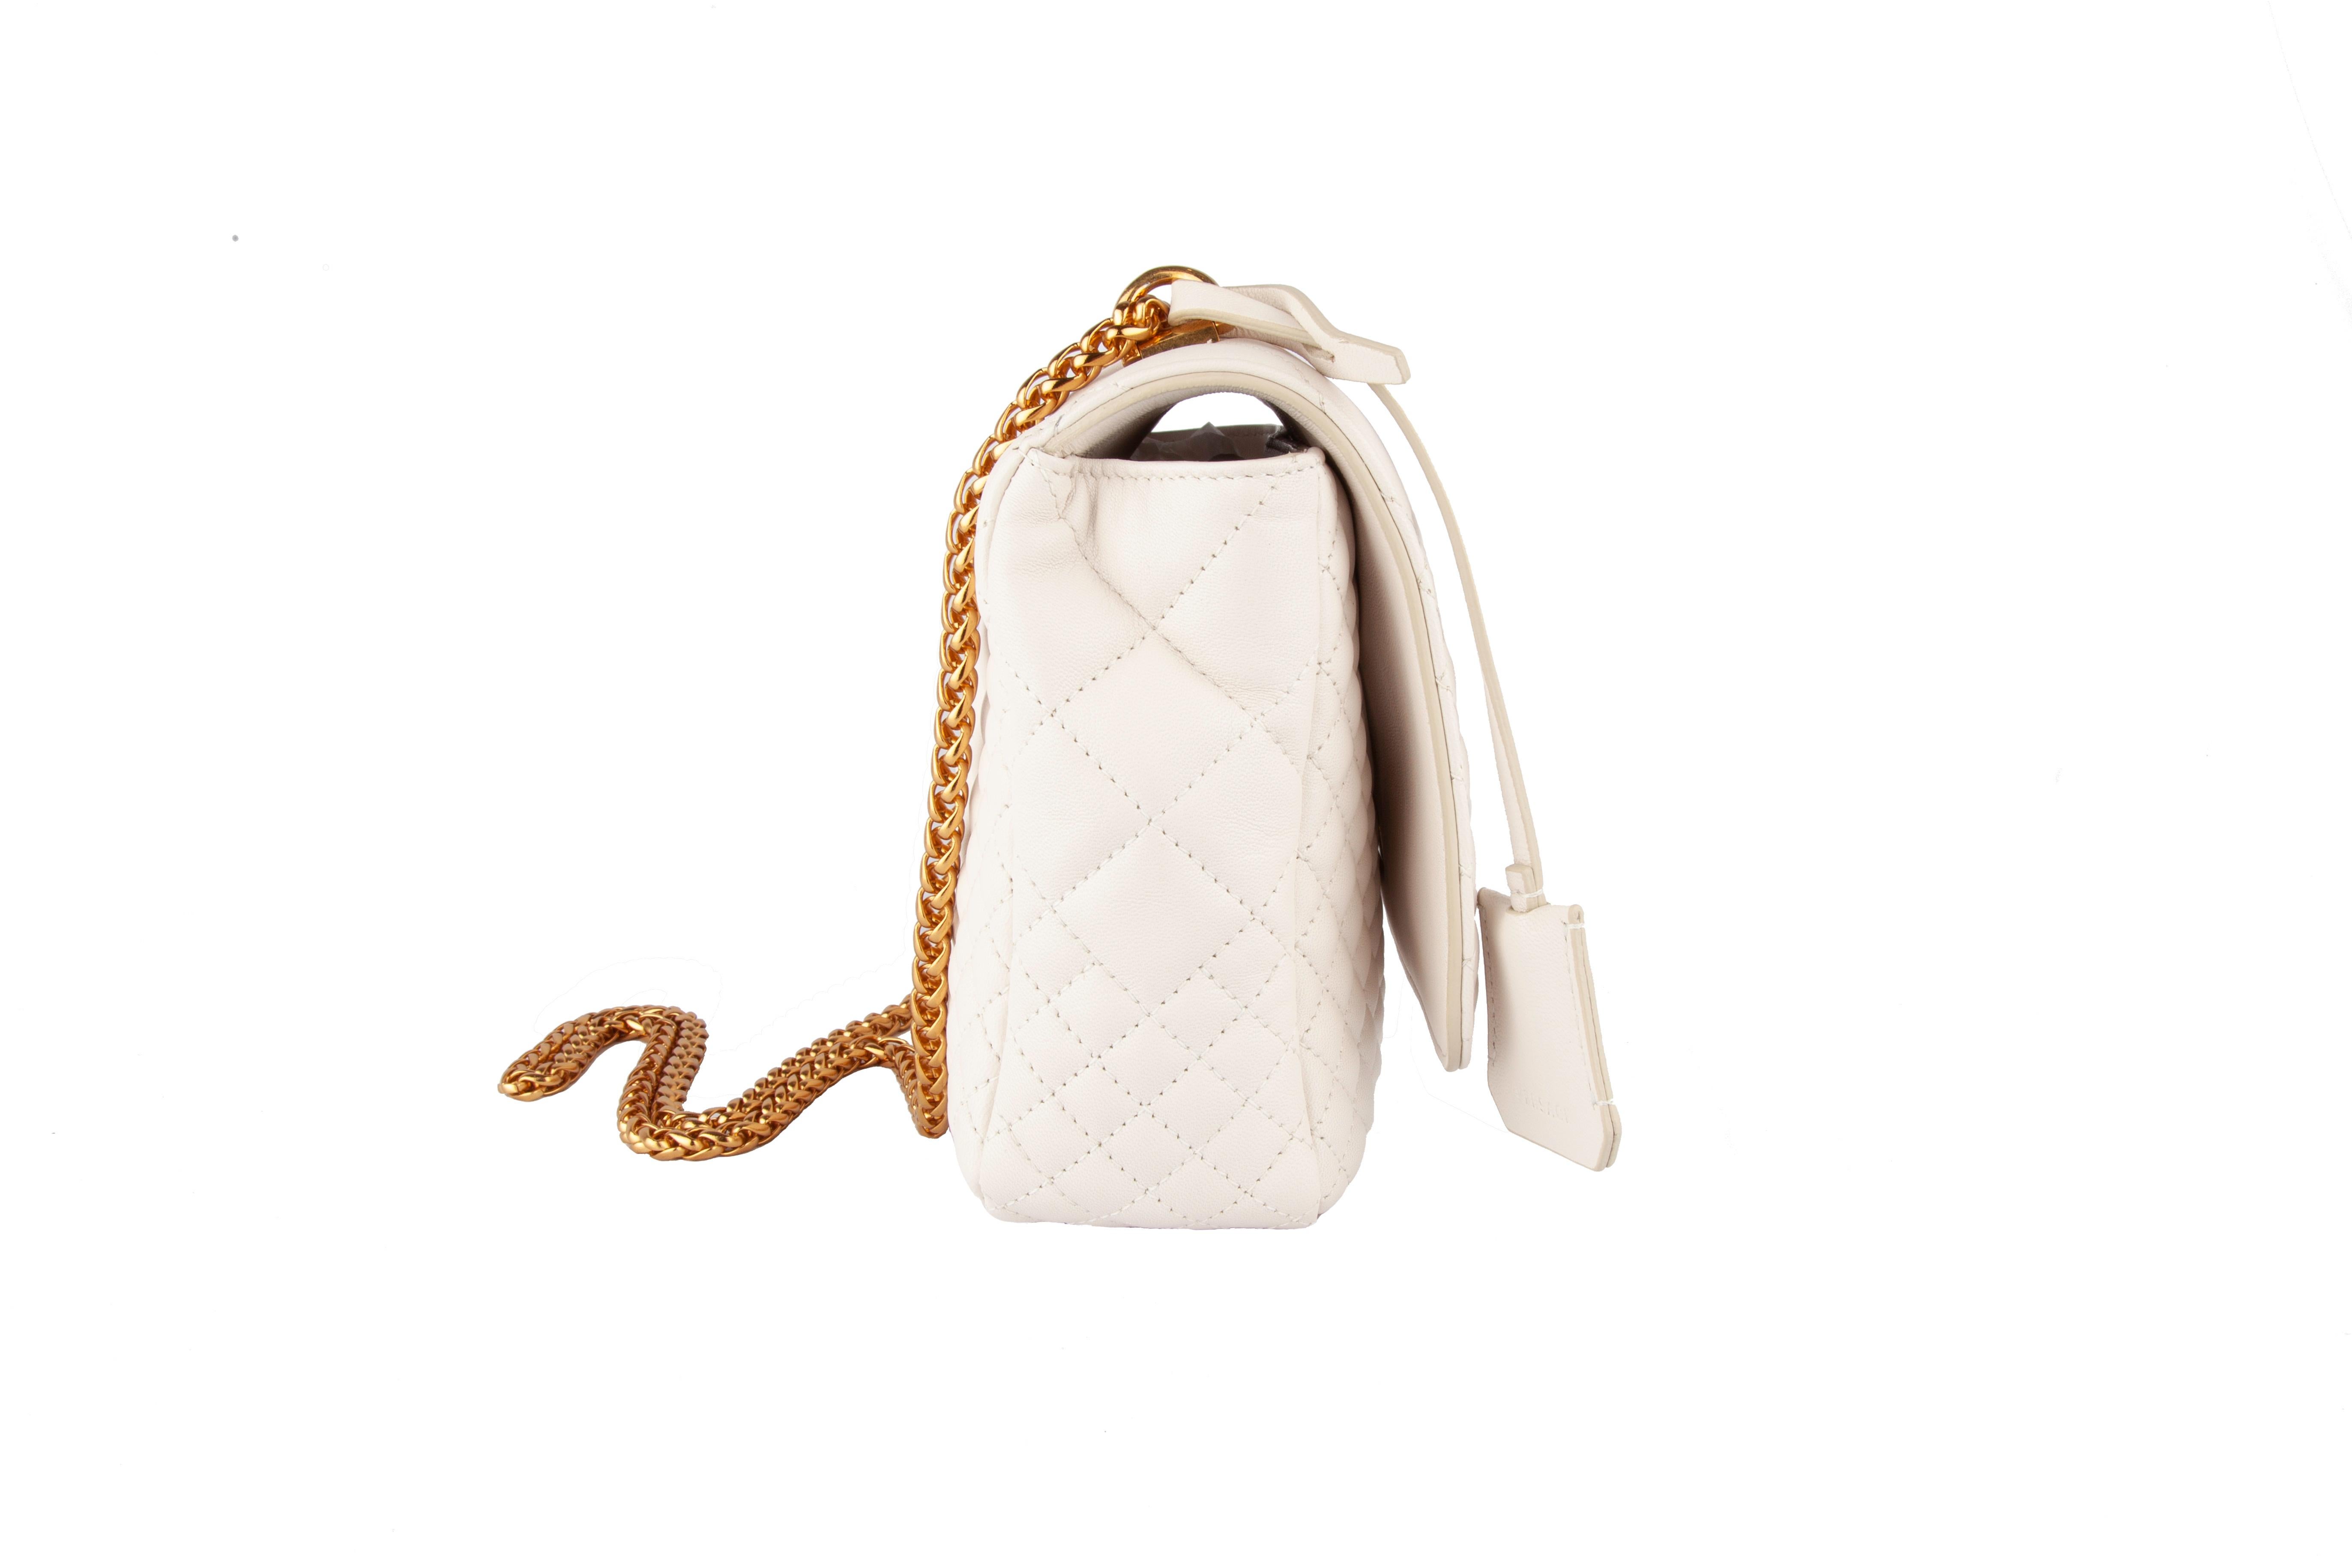 This medium white quilted leather Versace Icon Shoulder Bag features two medusa details, a gold tone chain strap, a fold-over closure, a hanging key fob, and a logo embossed lock. Brand new. Made in Italy.

Measurements: Approx.  10 x 4 x 7